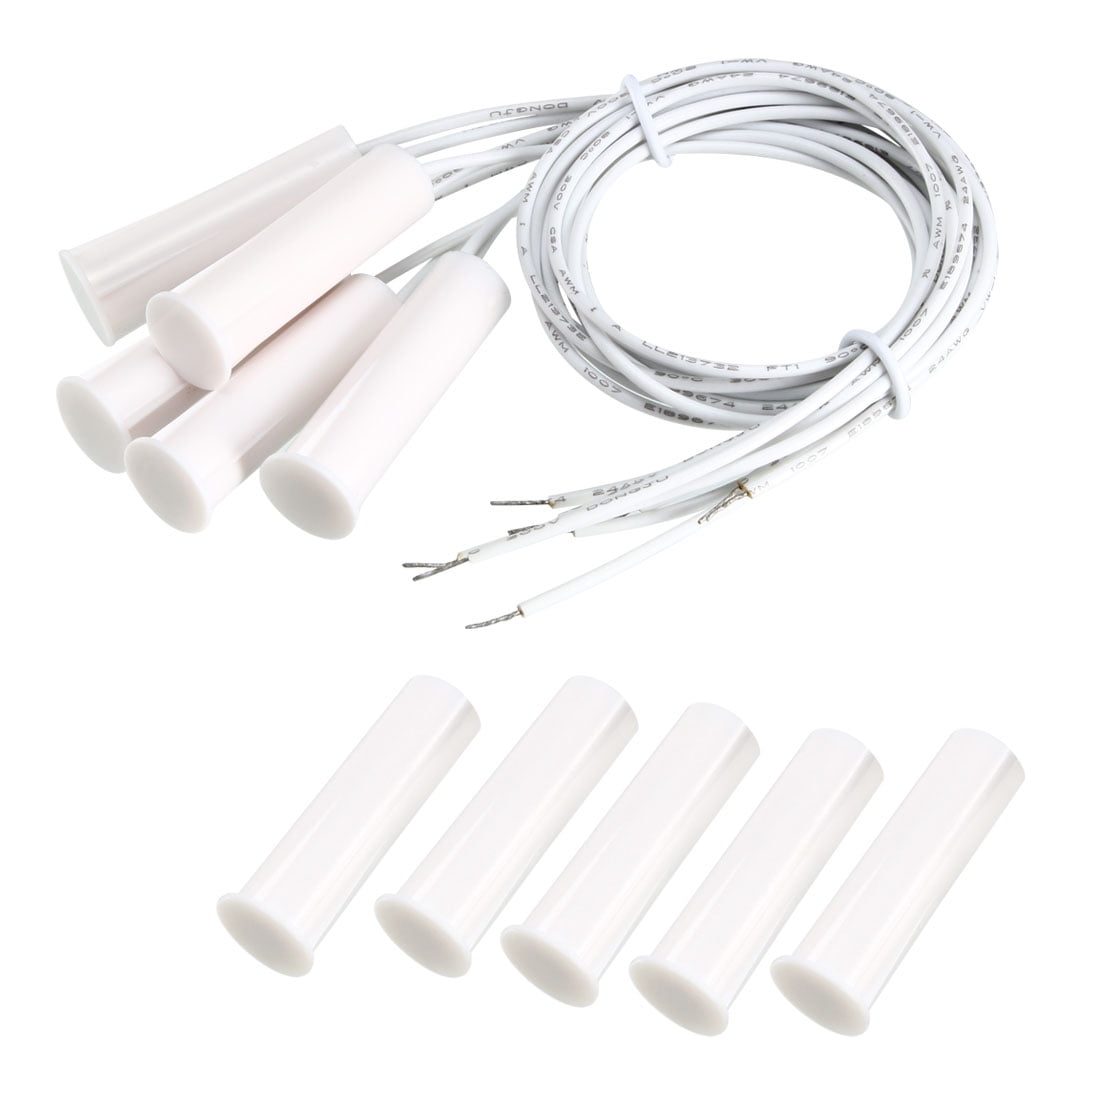 5 Long off white Home Alarm Magnetic Reed Switch Contacts Closed loop W/ Magnet 